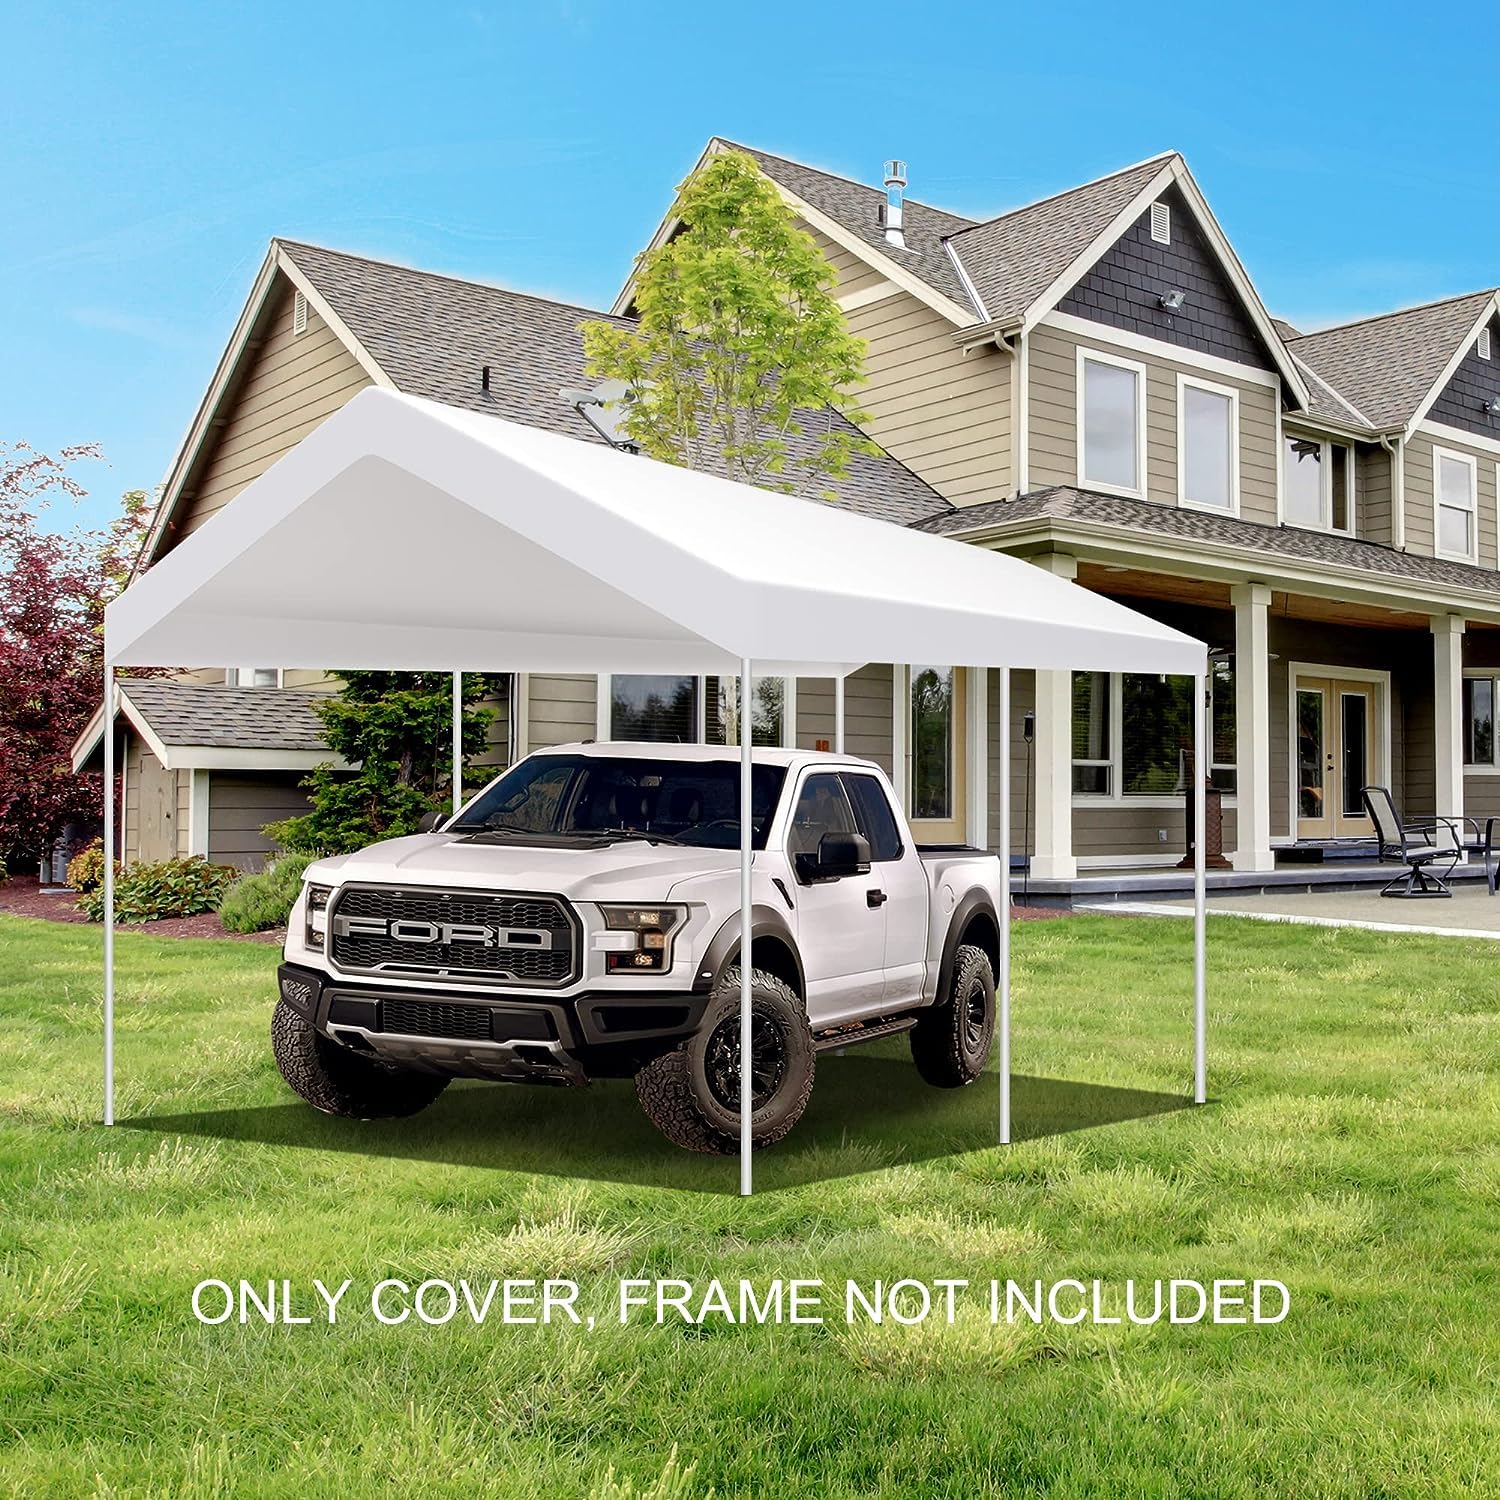 TGEHAP 10'x20' Carport Replacement Top Canopy Cover White for Car Garage Top Tarp Shelter Waterproof & UV Protected w/Ball Bungees (Only Top Cover, Frame is not Included)